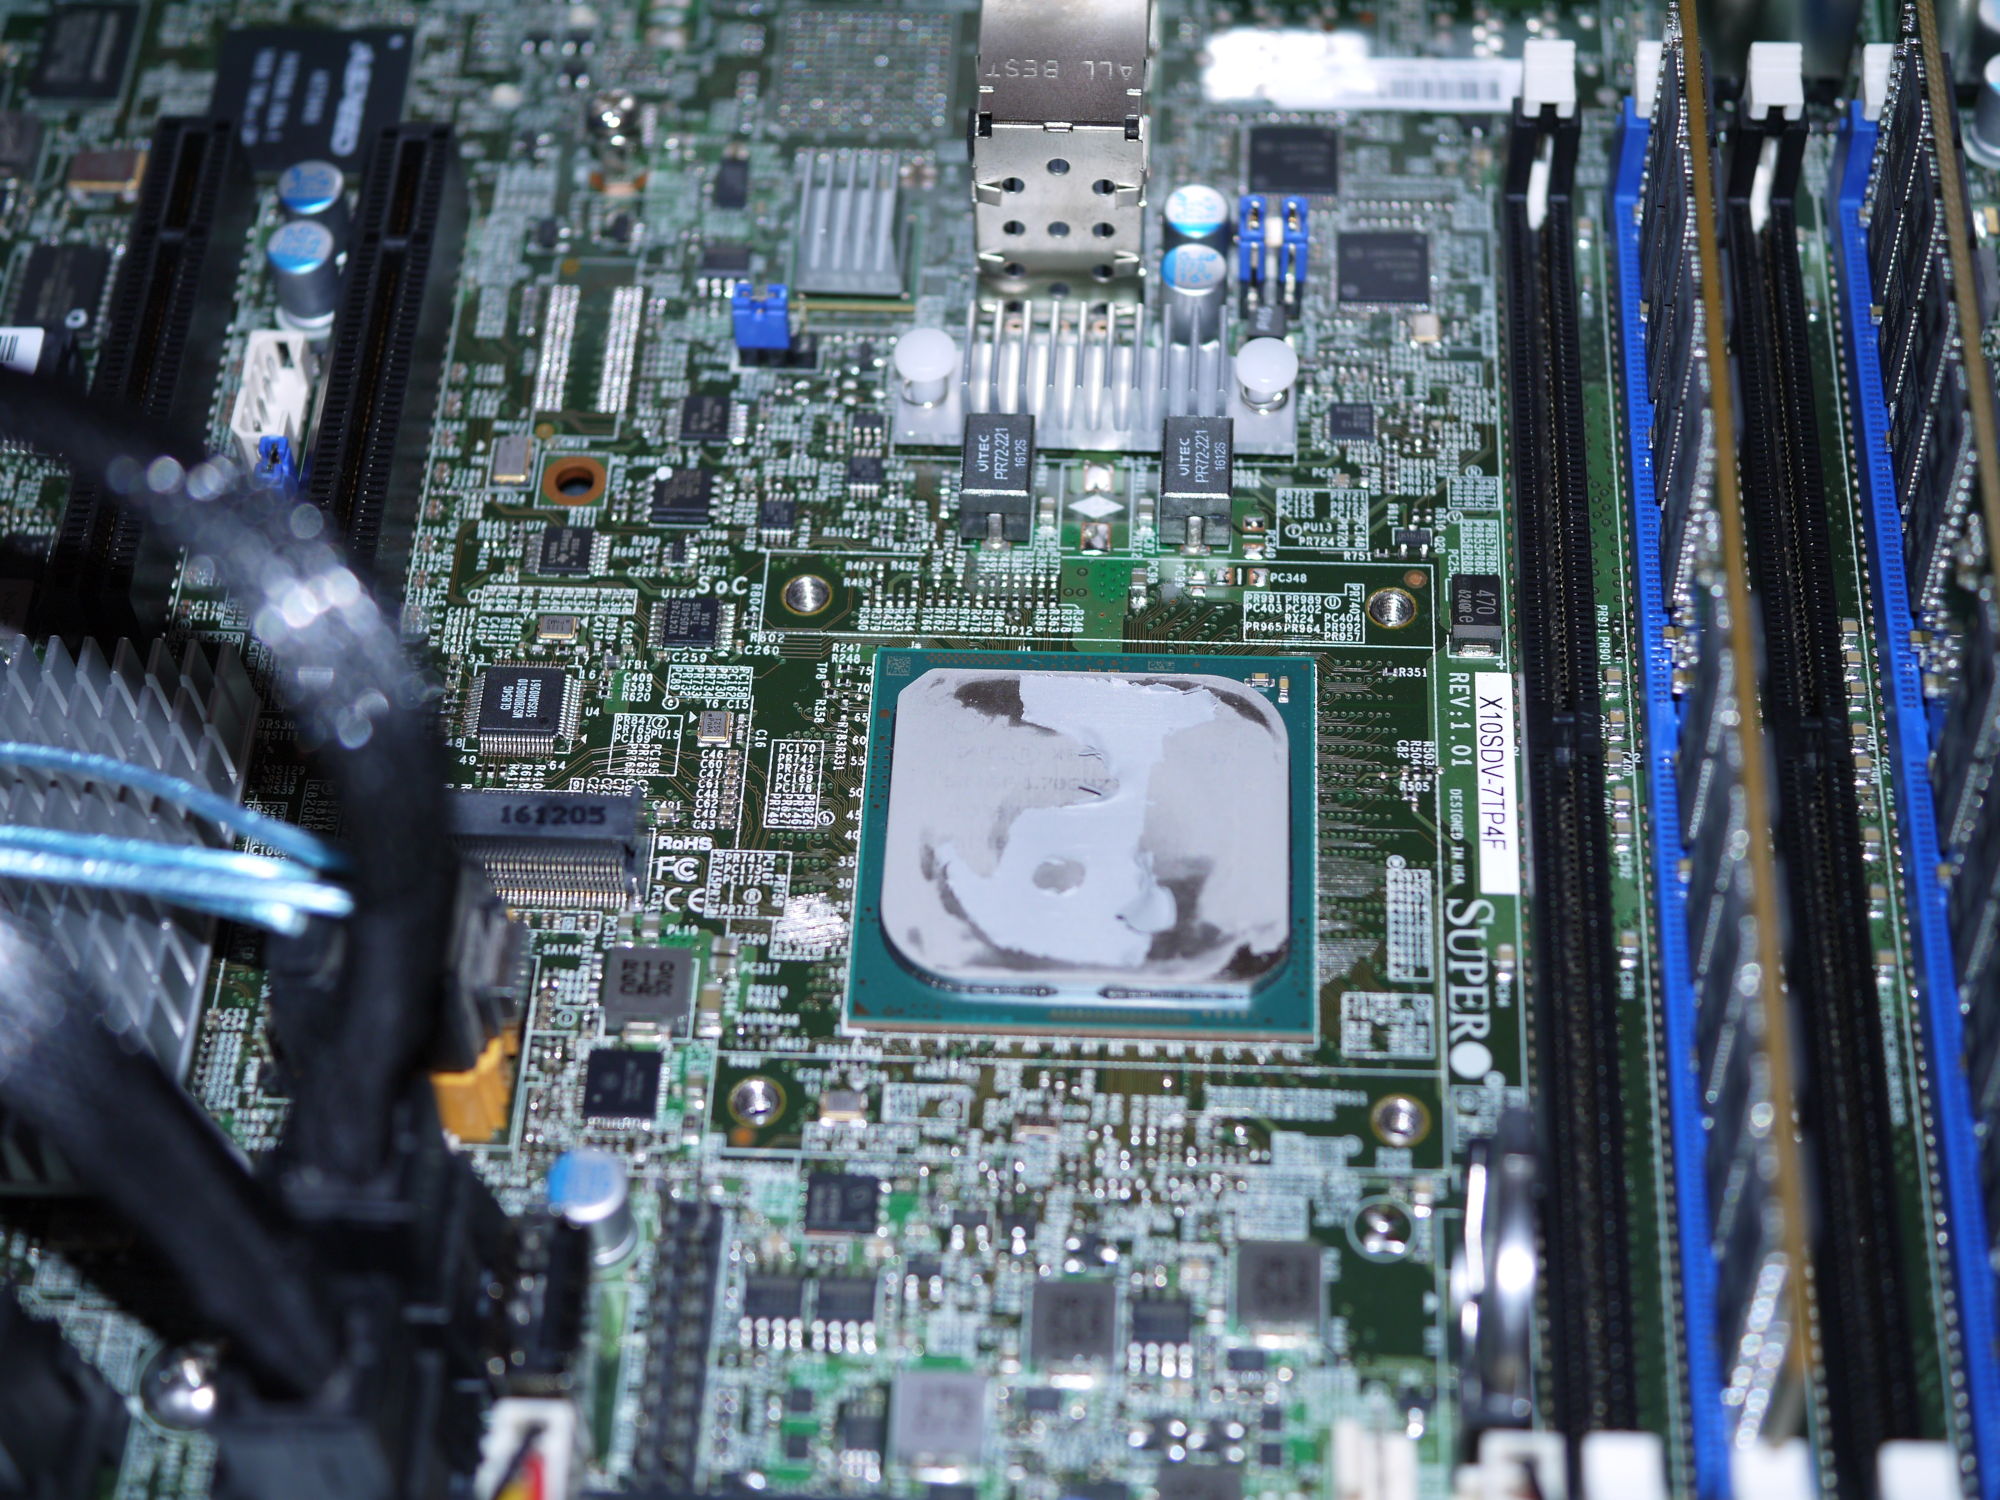 Supermicro X10SDV-7TP4F with the stock heatsink removed